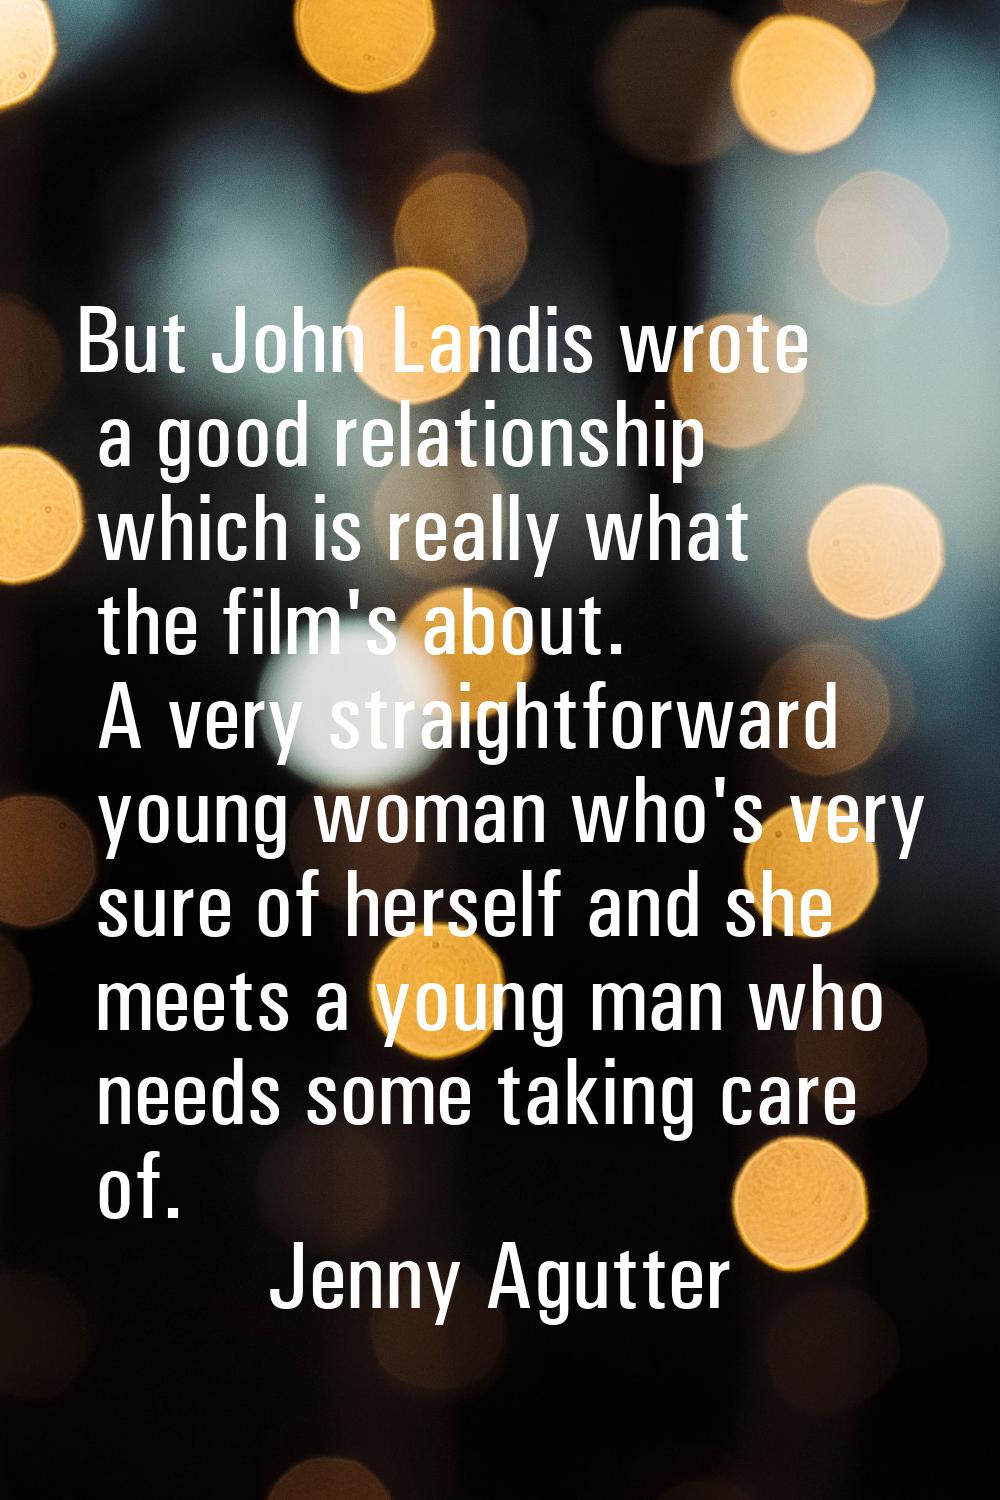 But John Landis wrote a good relationship which is really what the film's about. A very straightfor